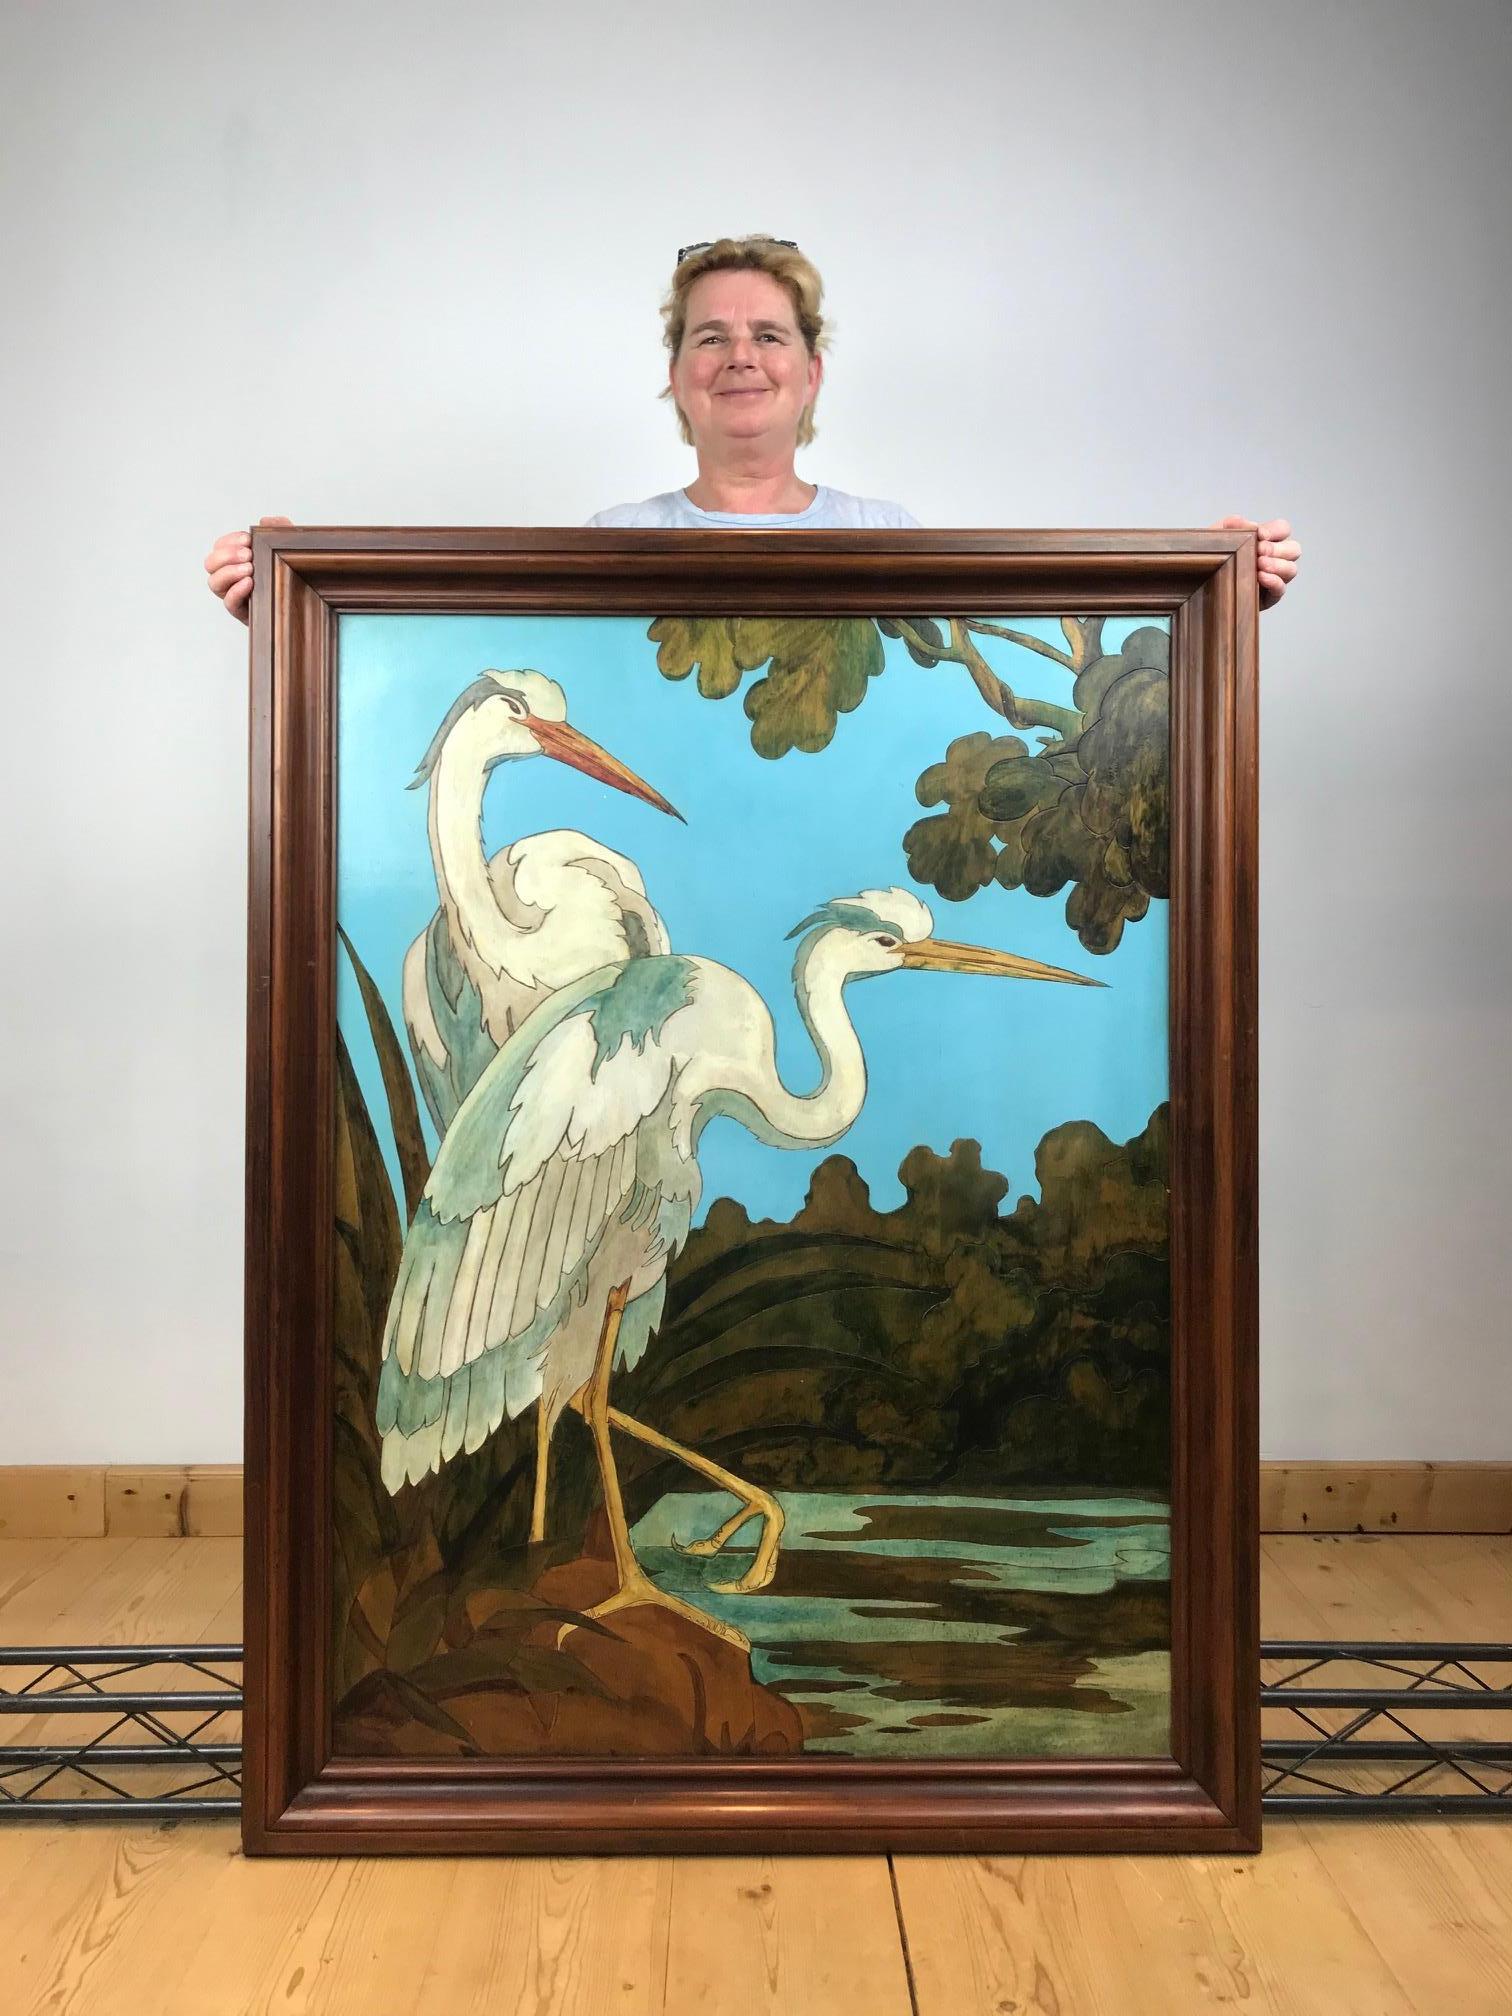 Stunning Large Painting with Heron Birds or Asian Crane Birds on Wood.  
This eye-catching painting with great colors dates circa 1970s. 
The water birds are standing next to the water surrounded with trees and nature. 
Awesome use of the bright